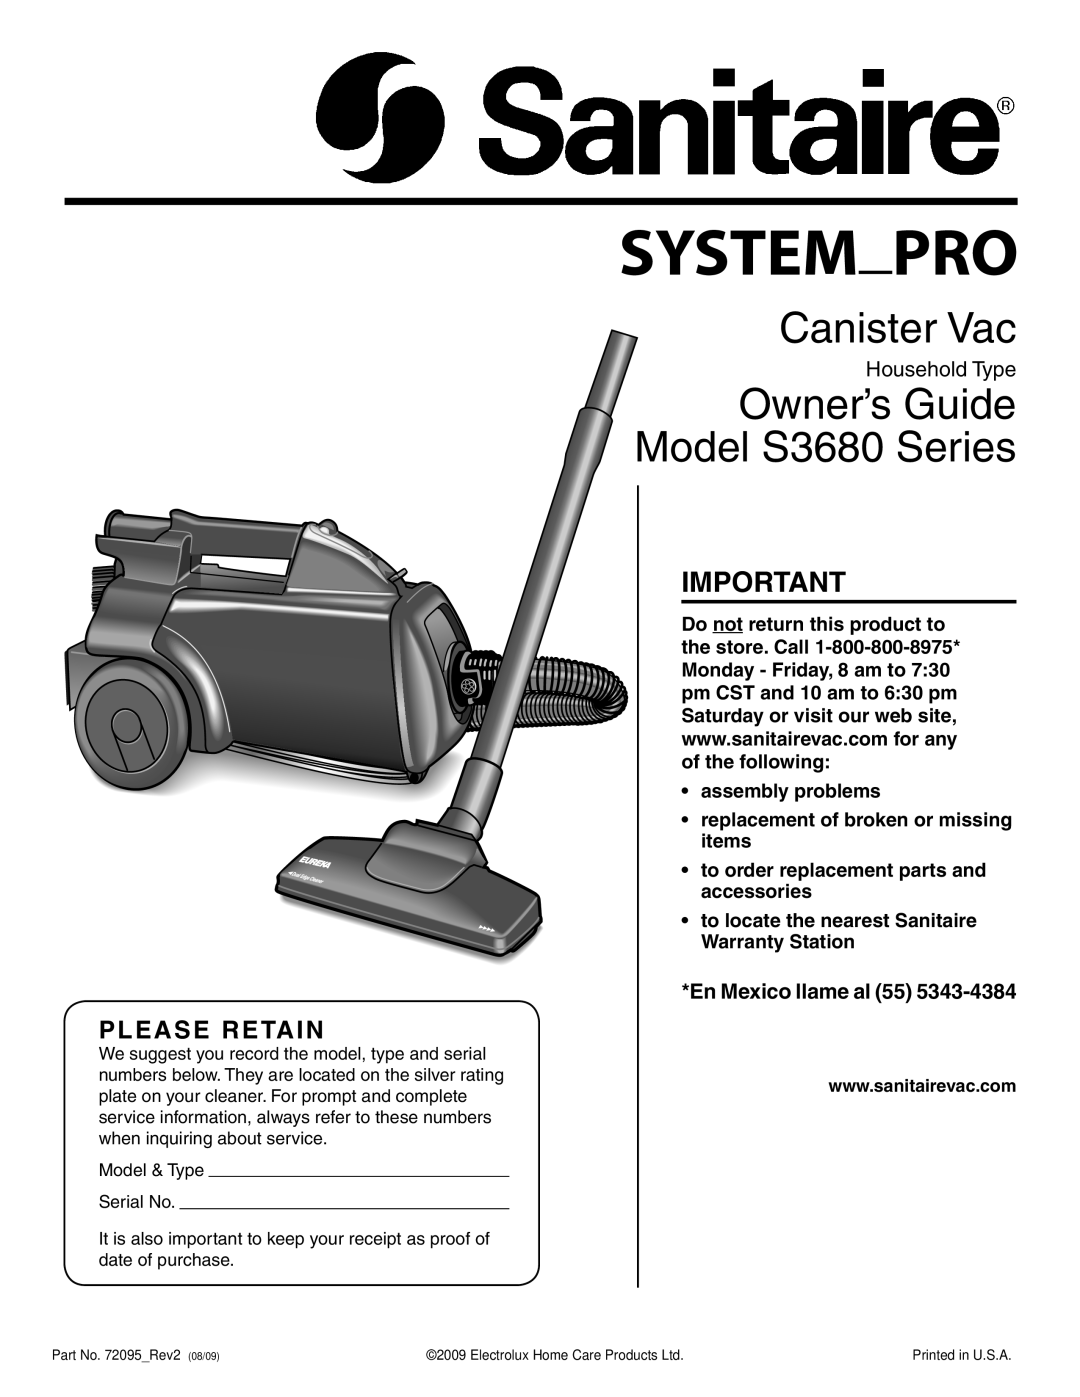 Sanitaire warranty En Mexico llame al, Canister Vac, Owner’s Guide Model S3680 Series, Please Retain 